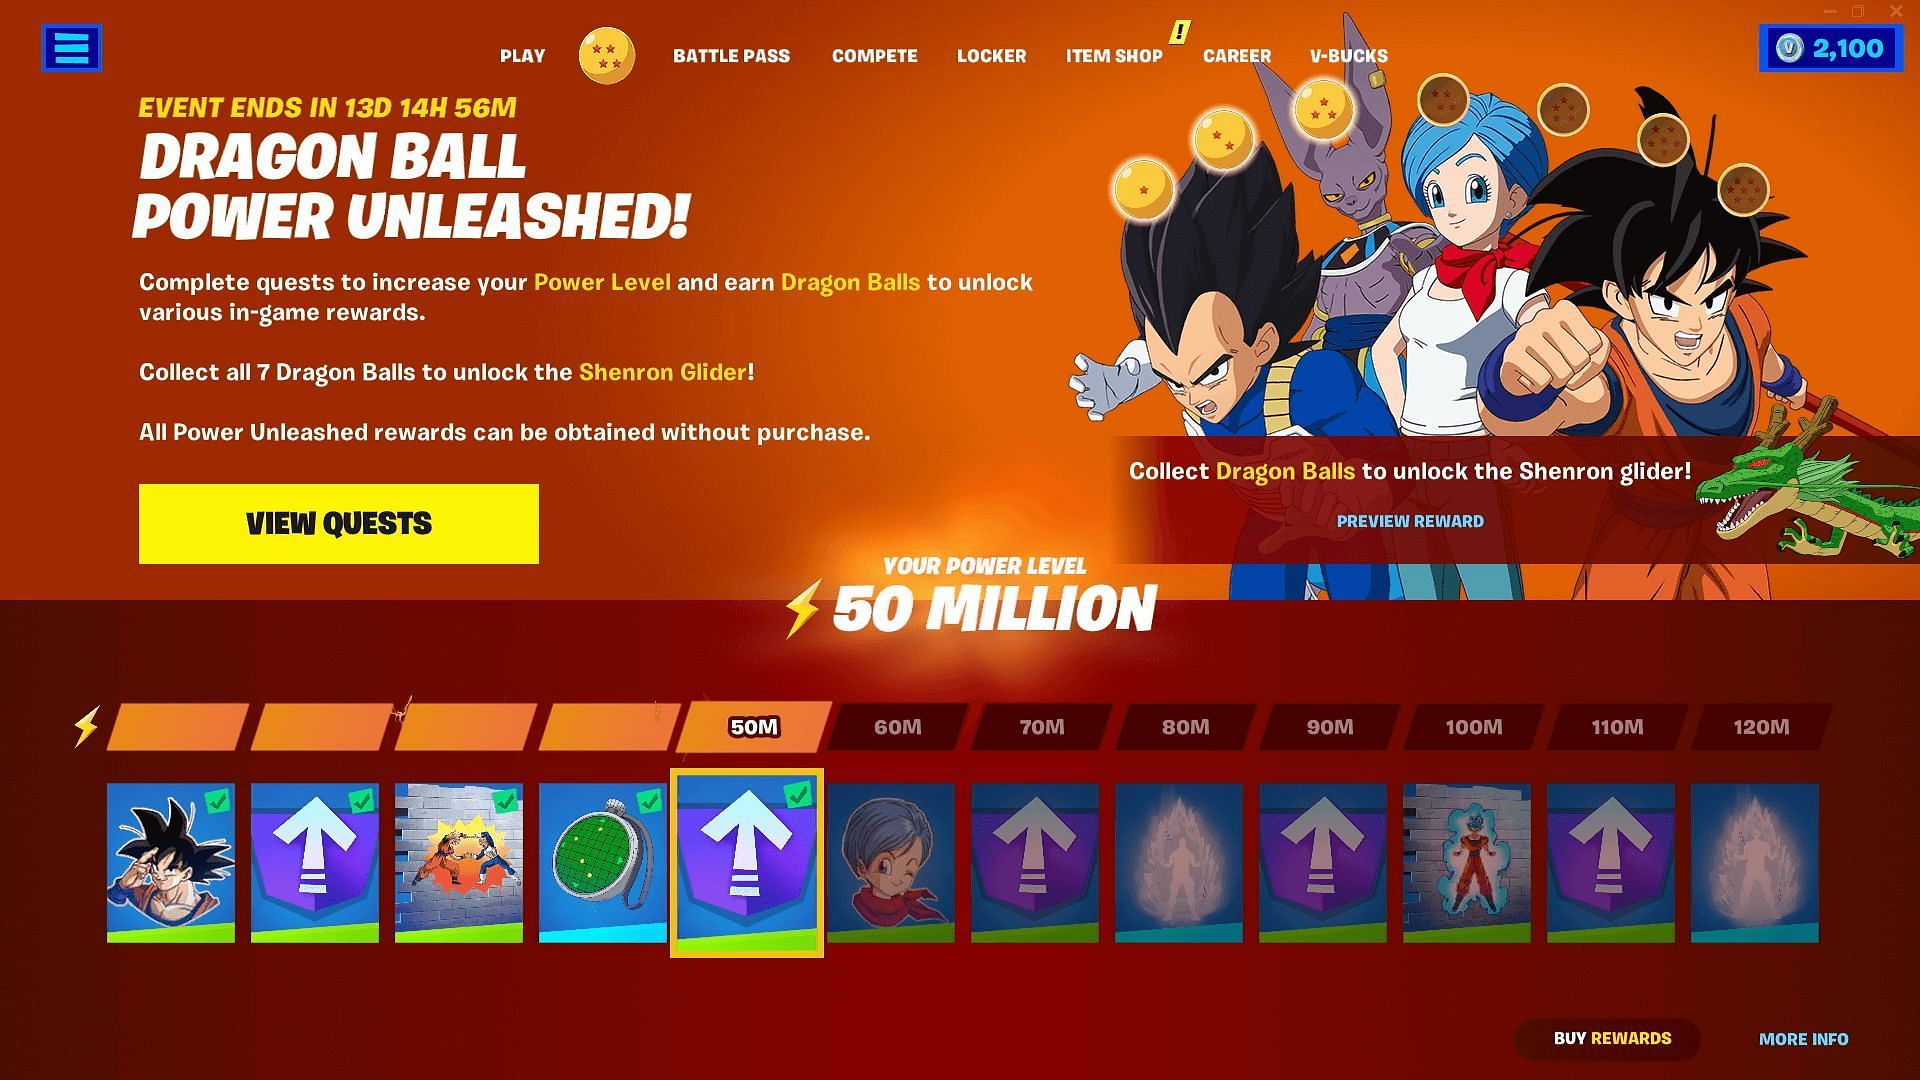 There is a new Dragon Ball tab in Fortnite (Image via Epic Games)